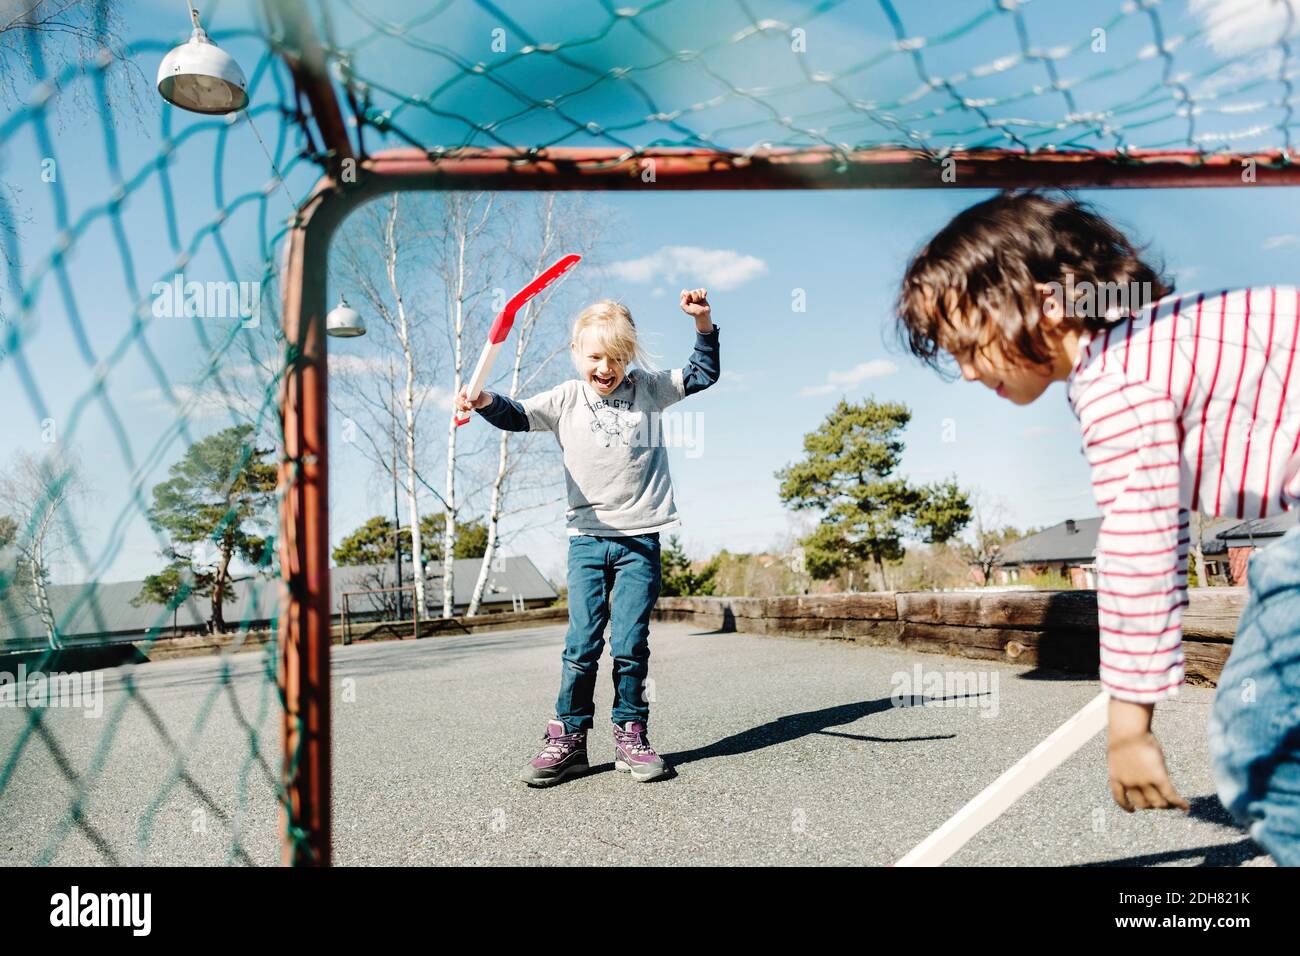 Excited girl gesturing while playing hockey with boy at yard Stock Photo